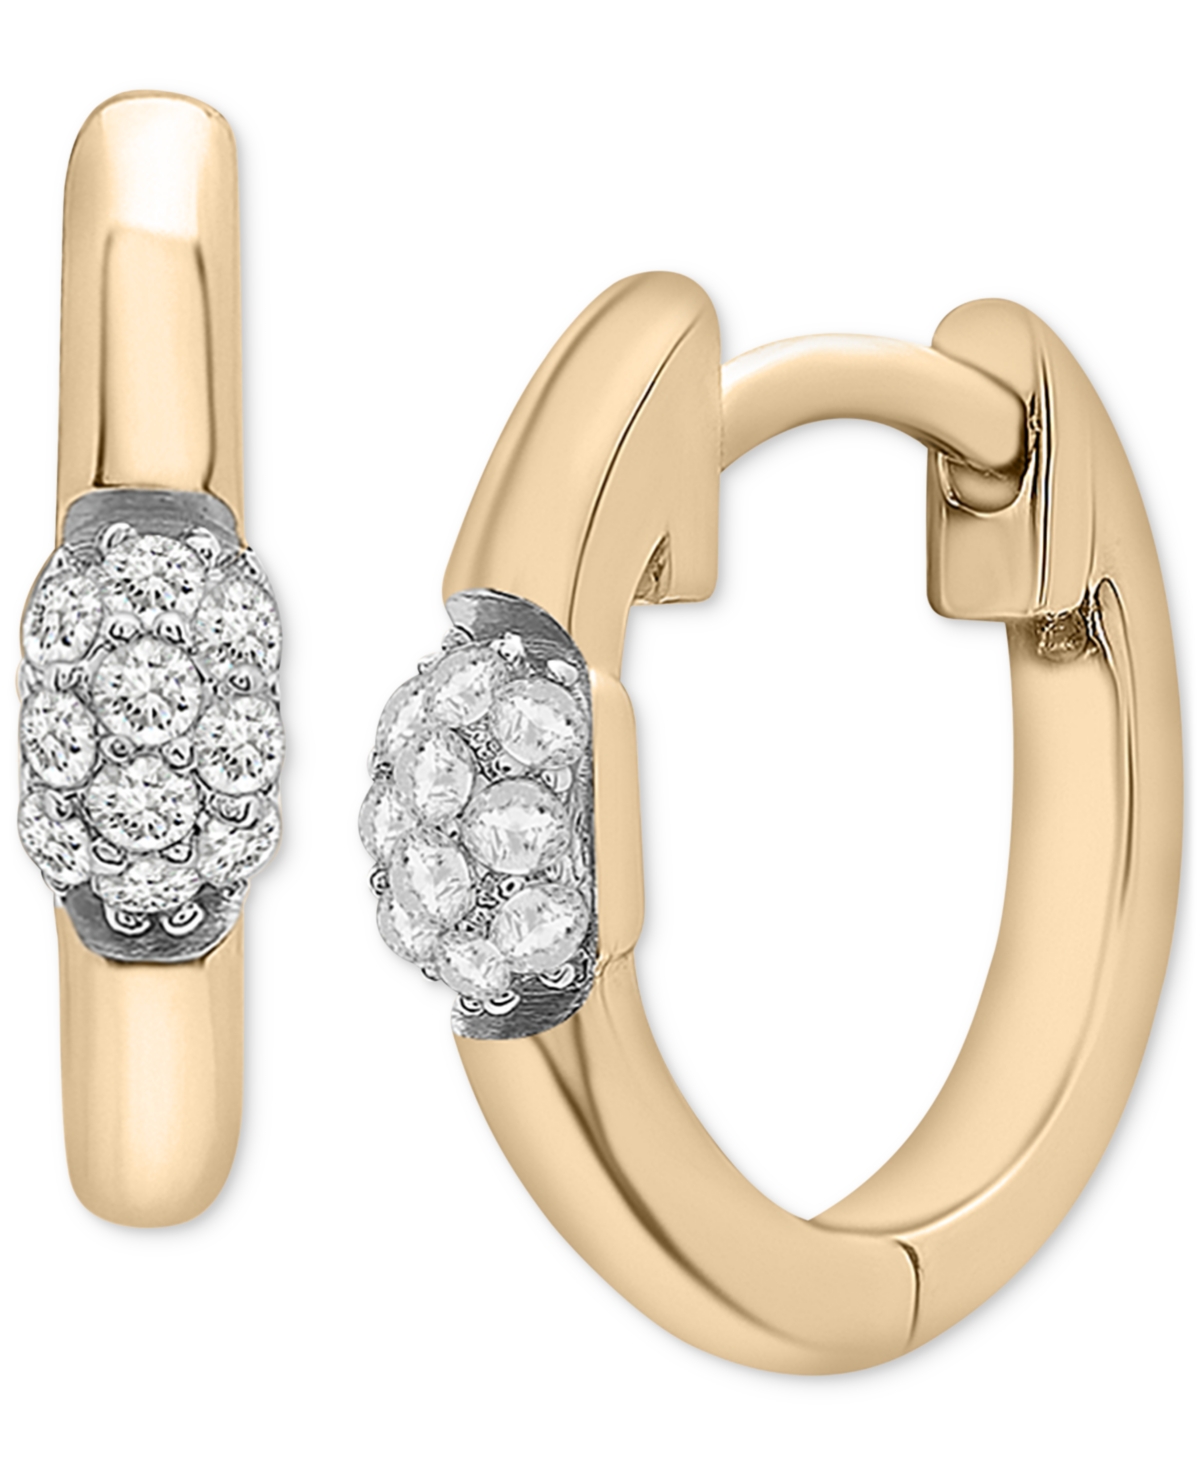 Diamond Mini Cluster Small Hoop Earrings (1/10 ct. t.w.) in Gold Vermeil, Created for Macy's - Gold Vermeil